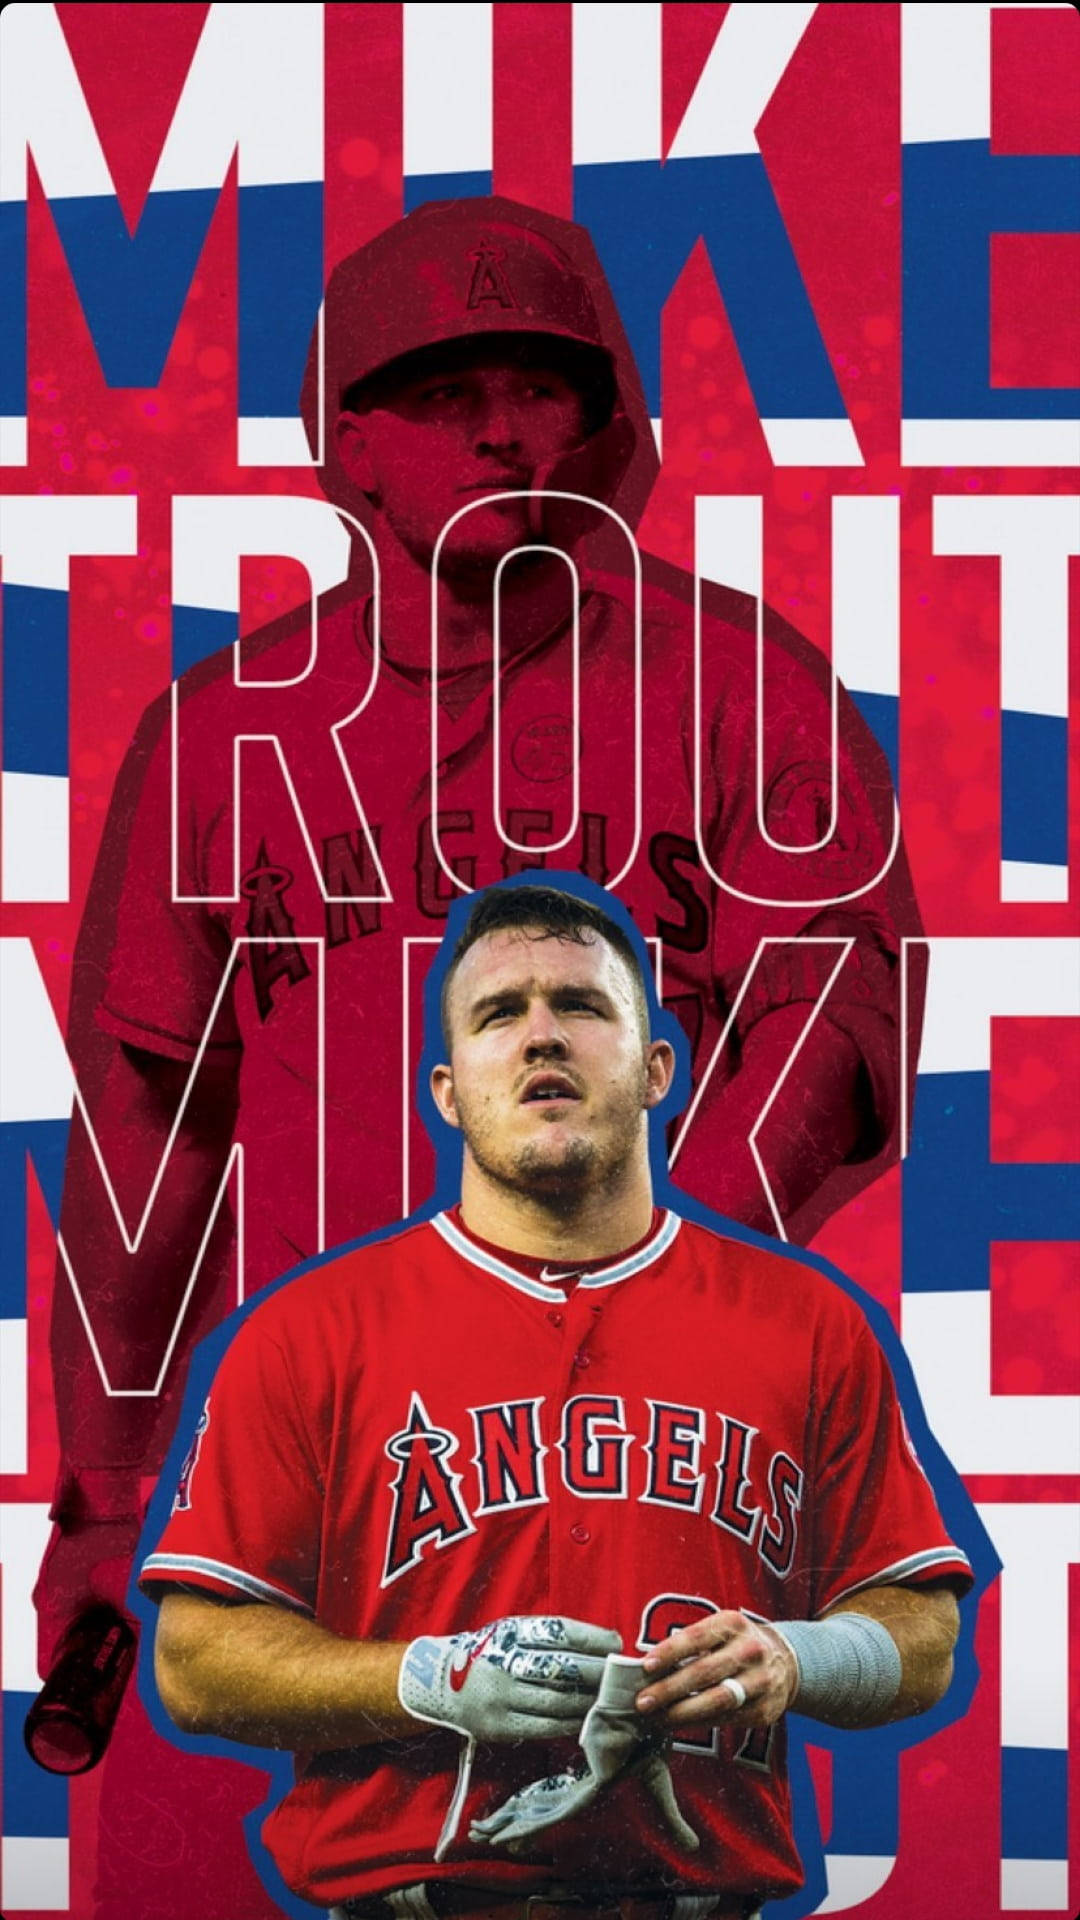 Mike Trout Number 27 Background